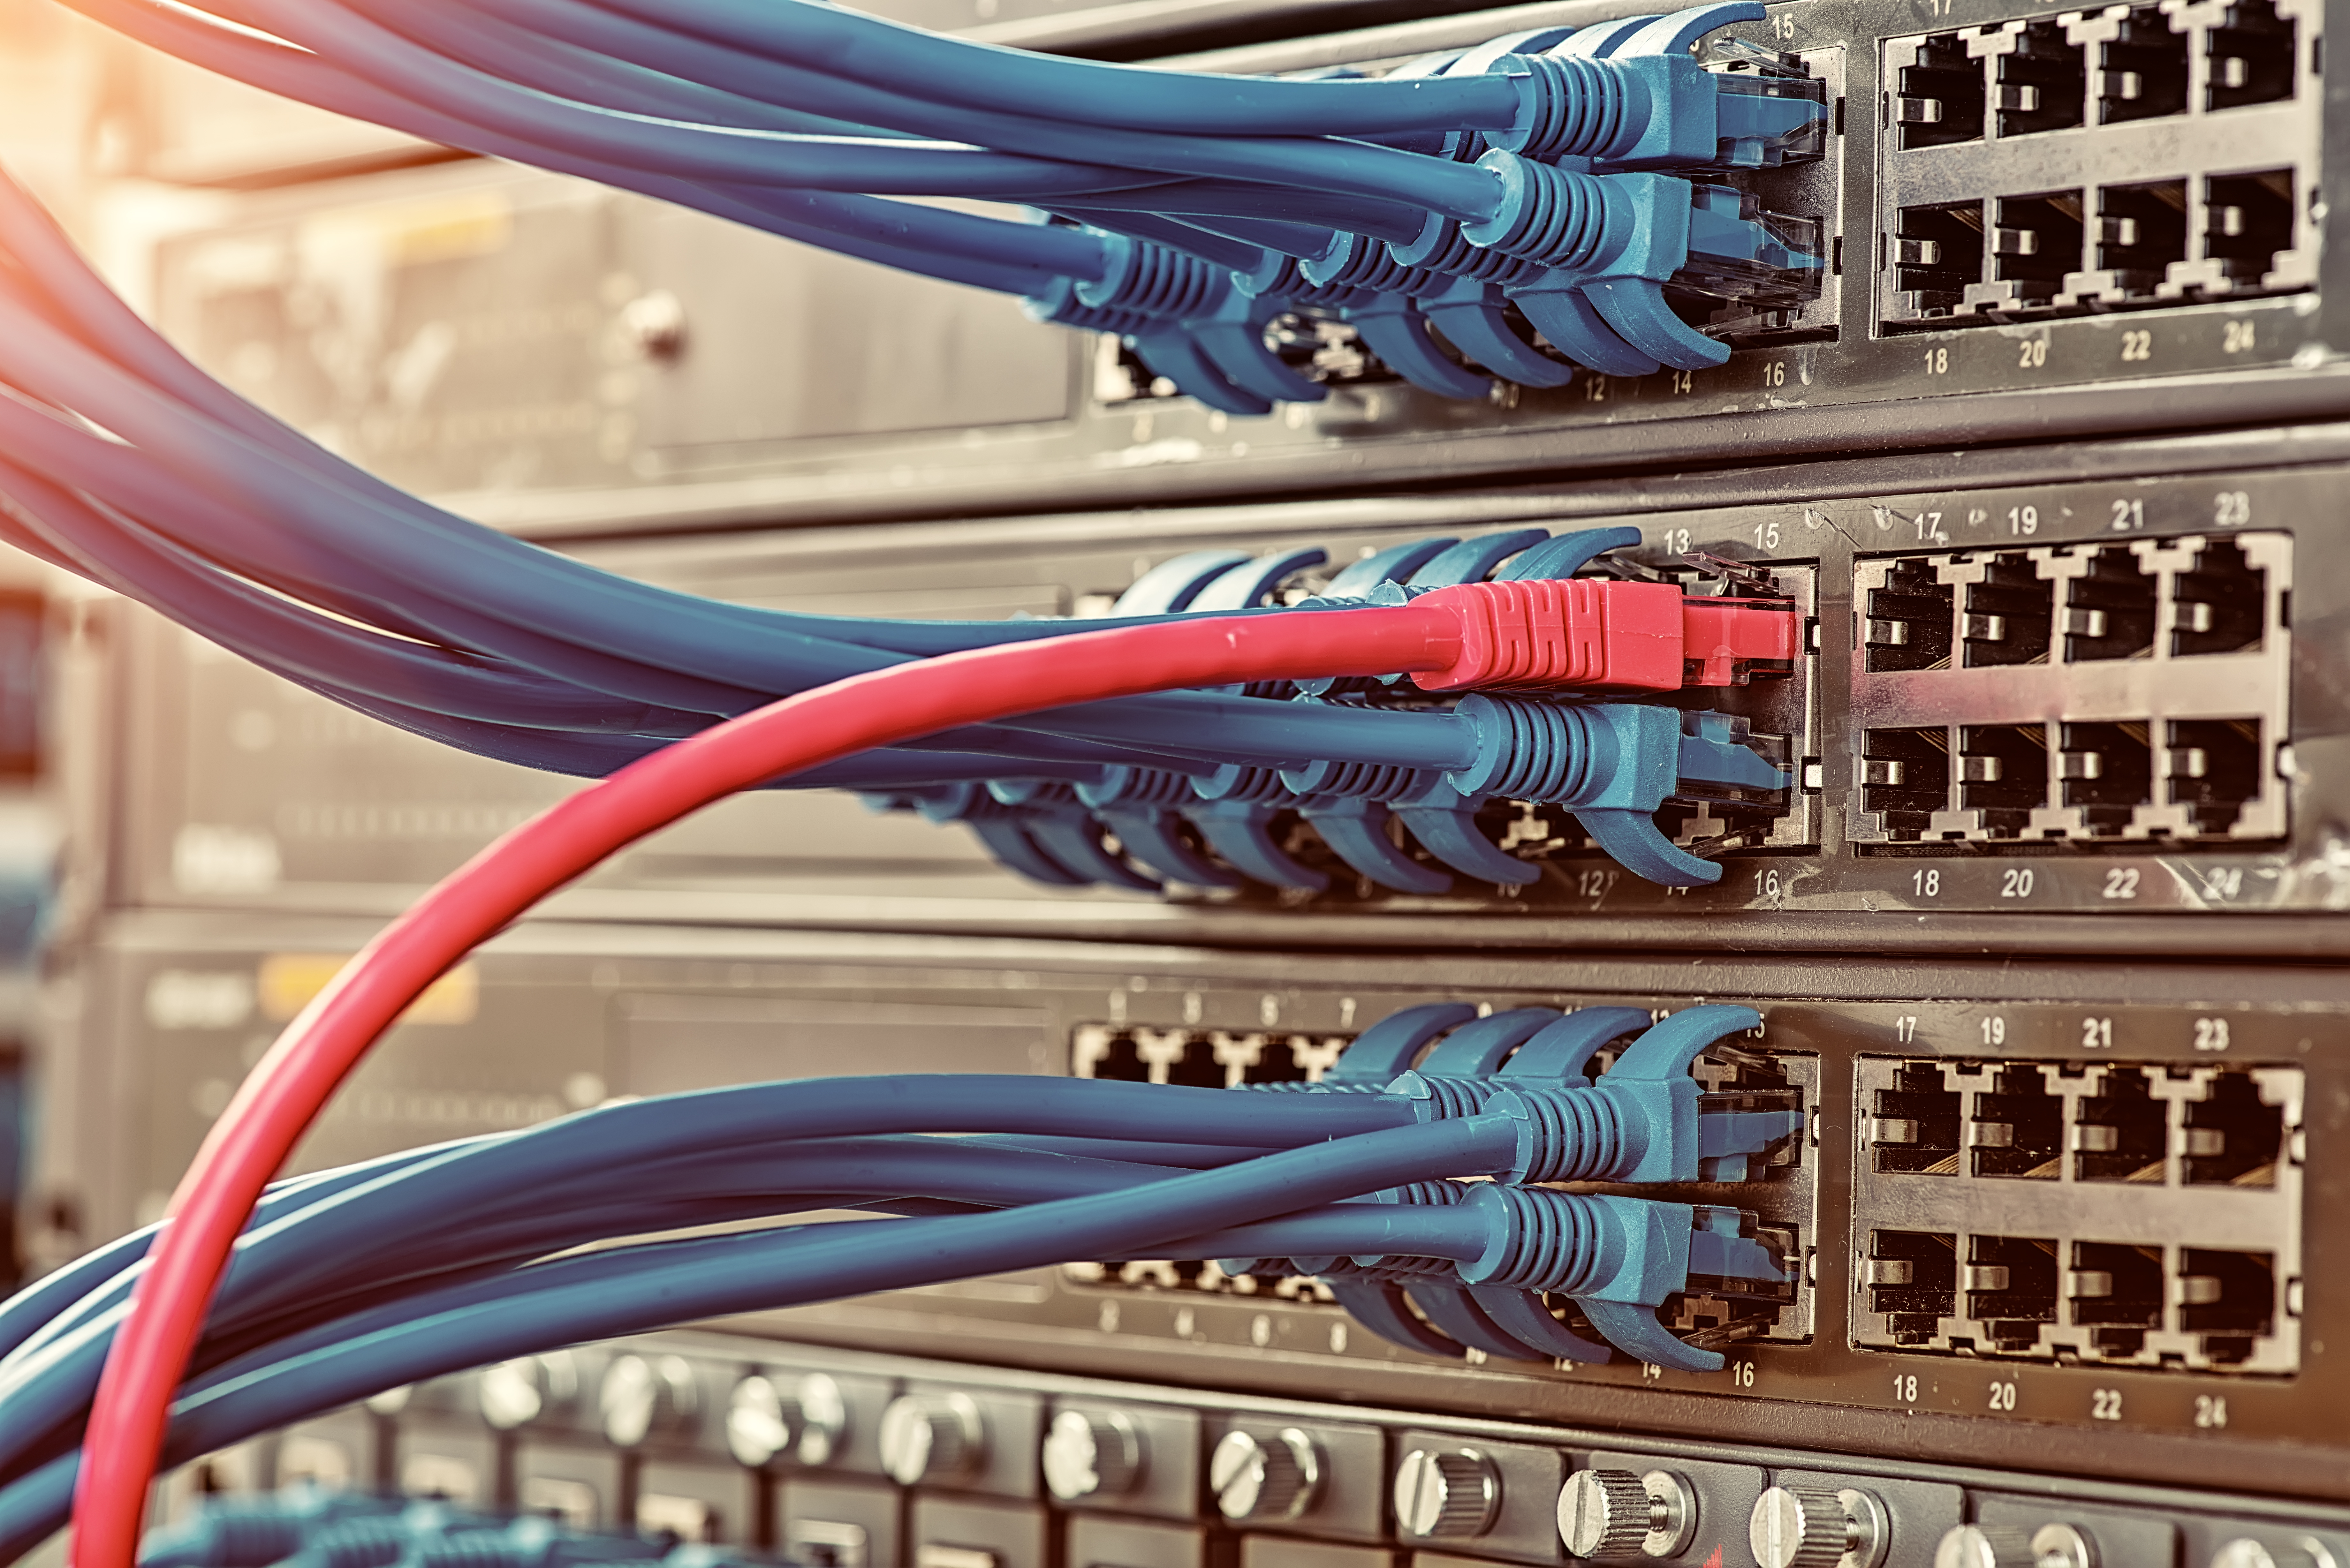 Learn About Ethernet Cables For Data Centers: Cat6 Or Fiber?